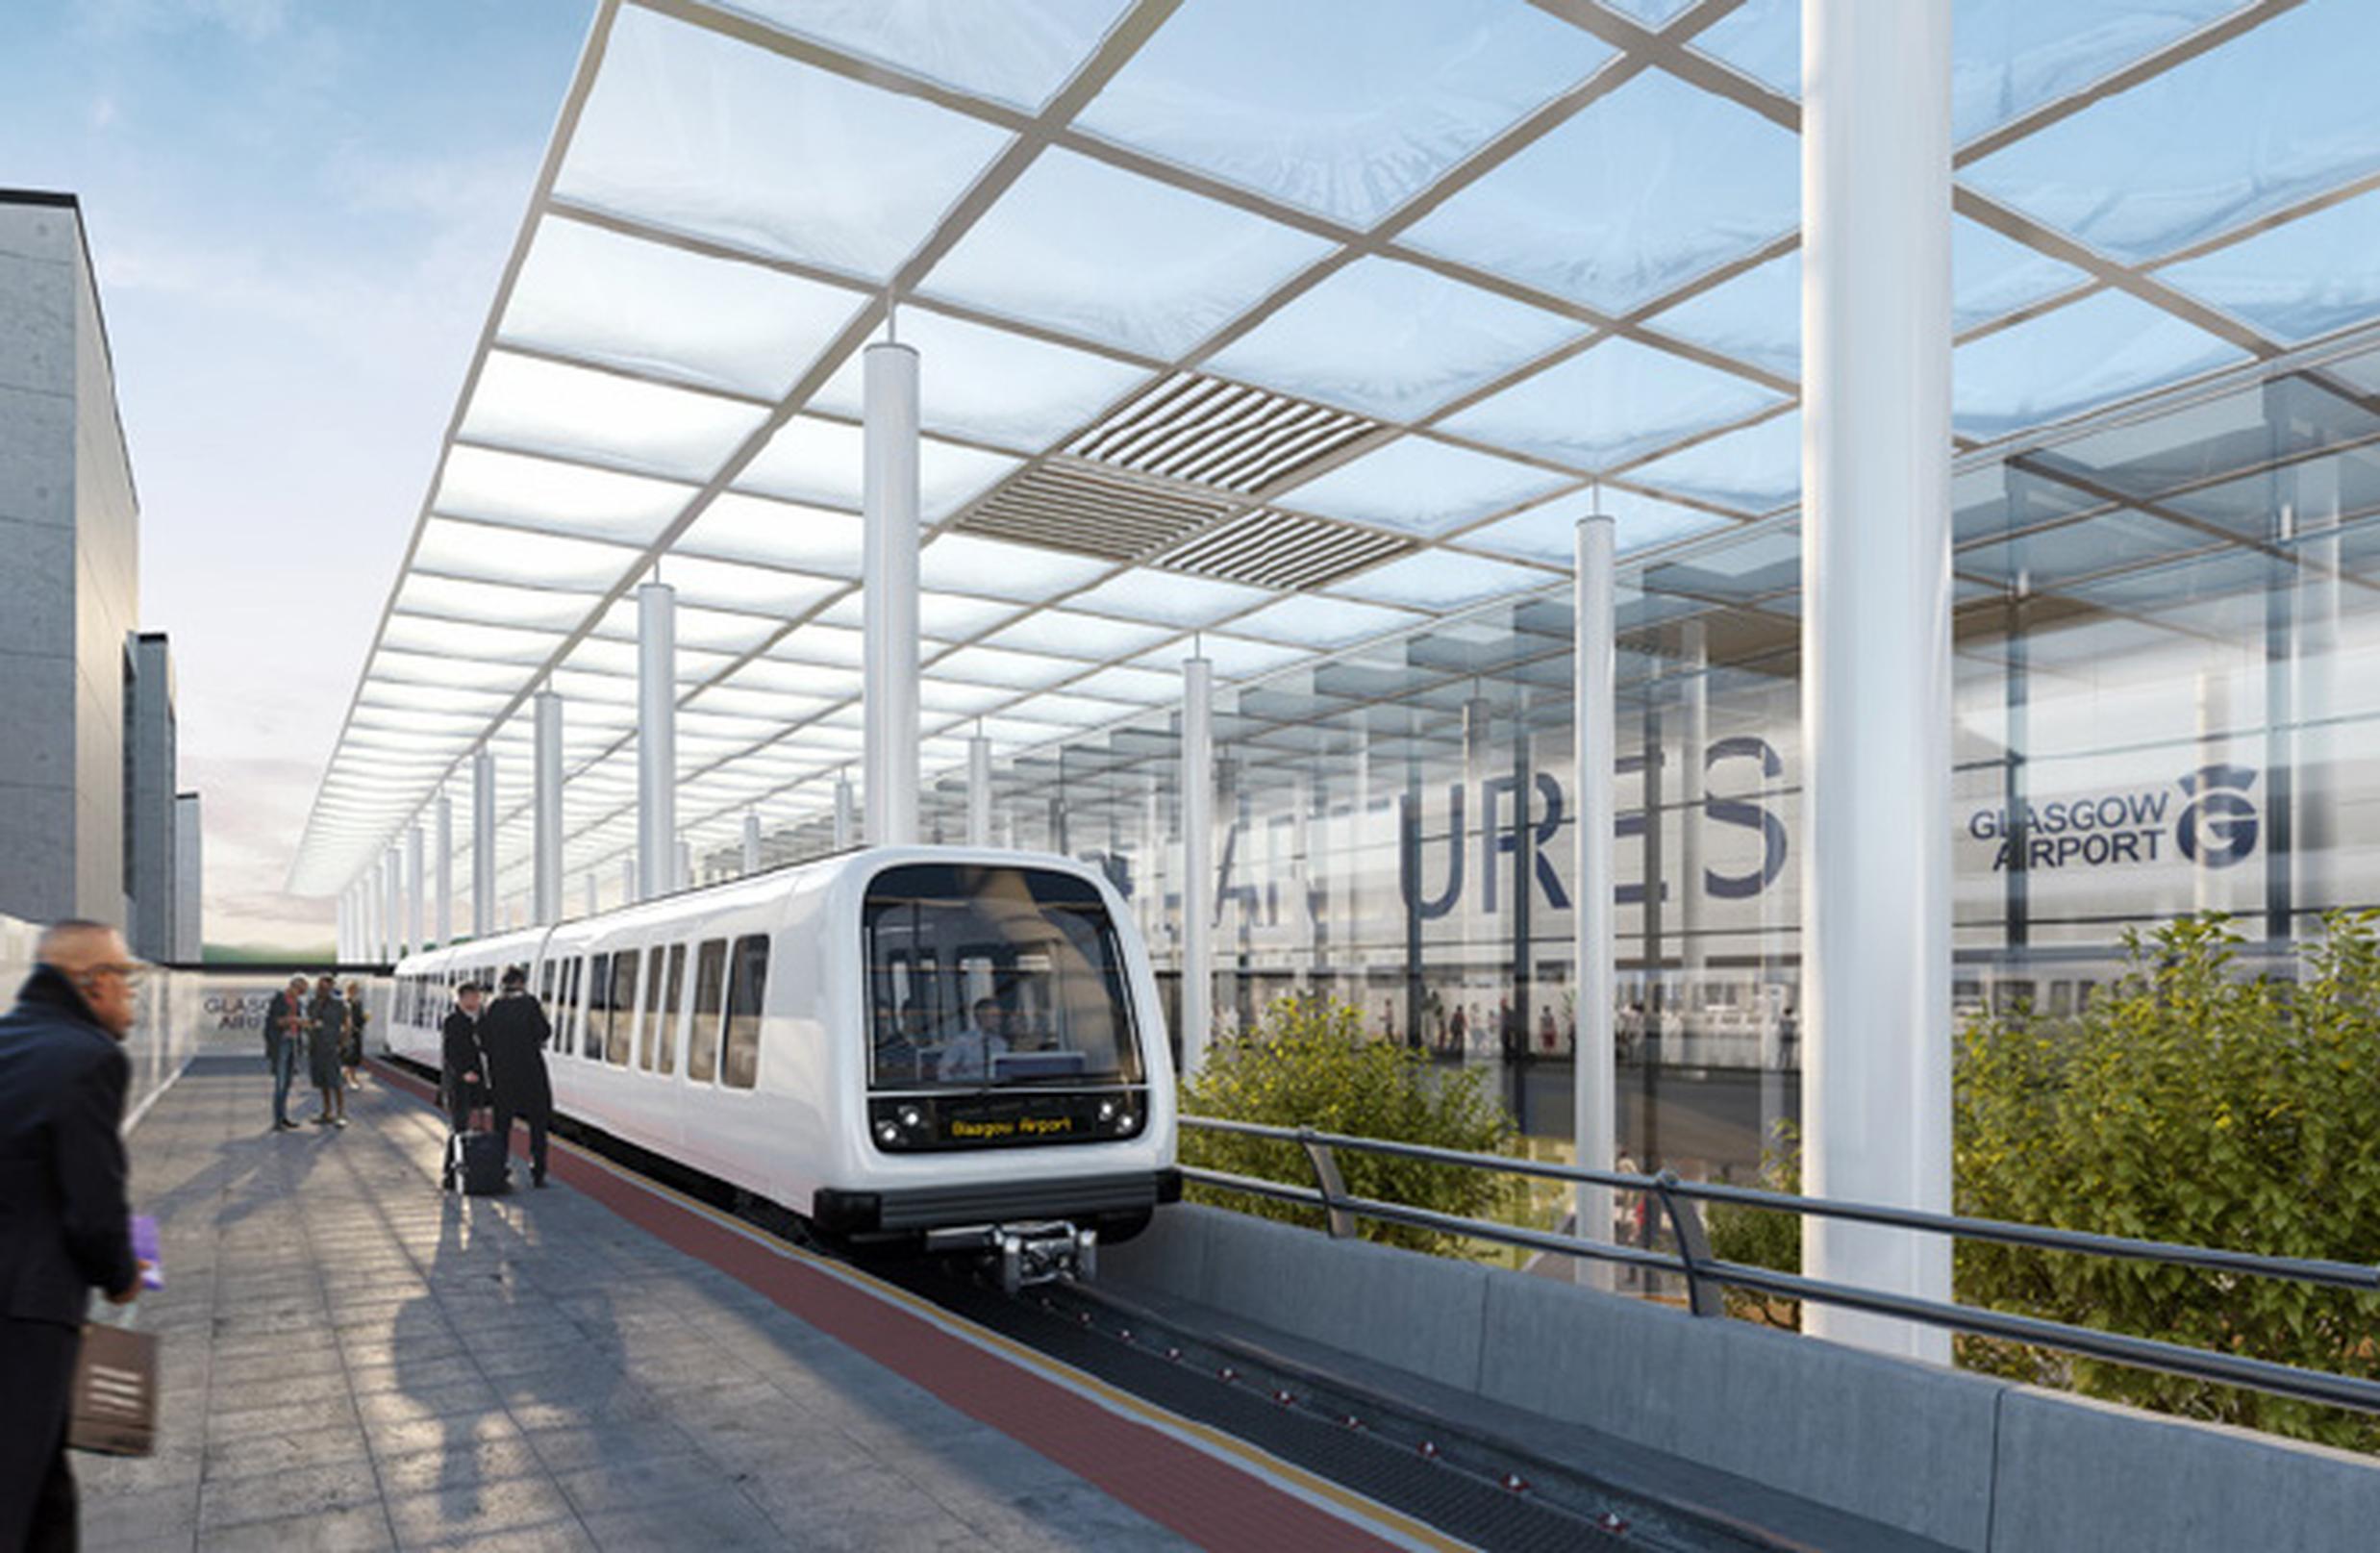 The Commission proposes a Metro system to serve Glasgow Airport. This is the fourth technology to be suggested for the airport, following on from heavy rail, tram-train, and personal rapid transit